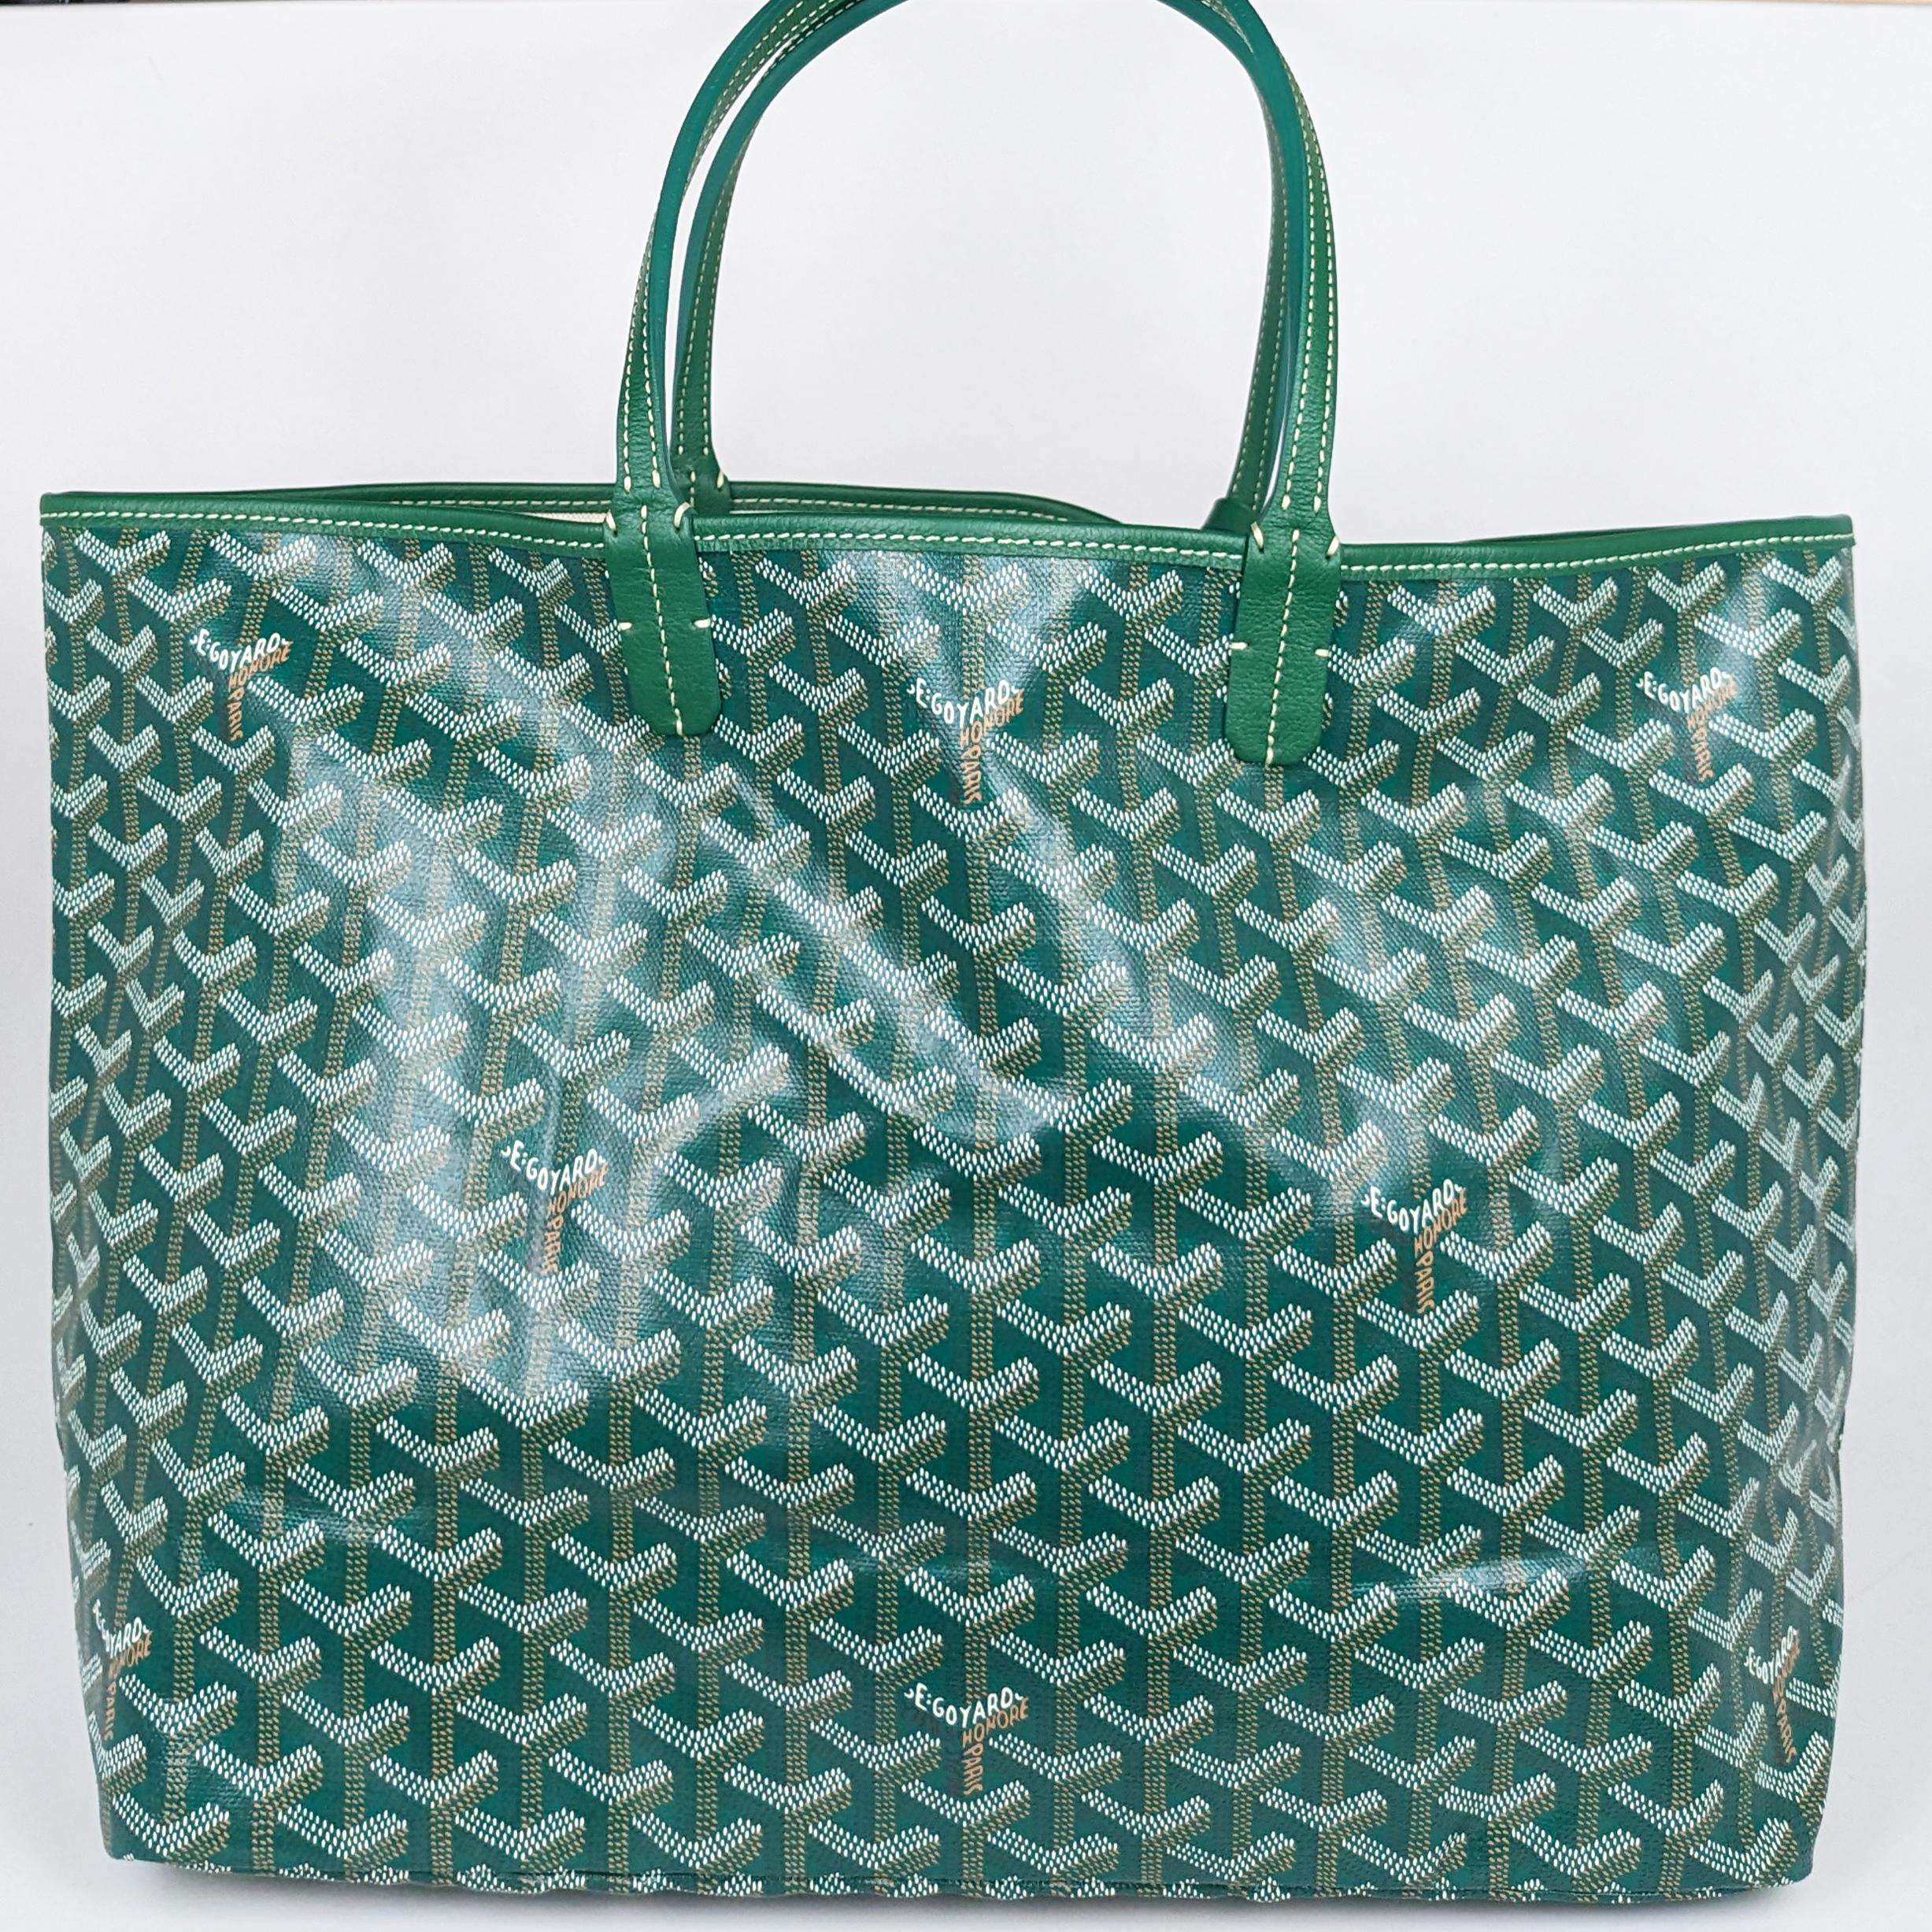 Condition: This authentic Goyard tote is in pristine pre-loved condition. There is a tiny stain in the interior.

No accessories included (dust bag, box, etc.)

Features: Sturdy leather strap handles, matching trim, an open top, and a beige canvas